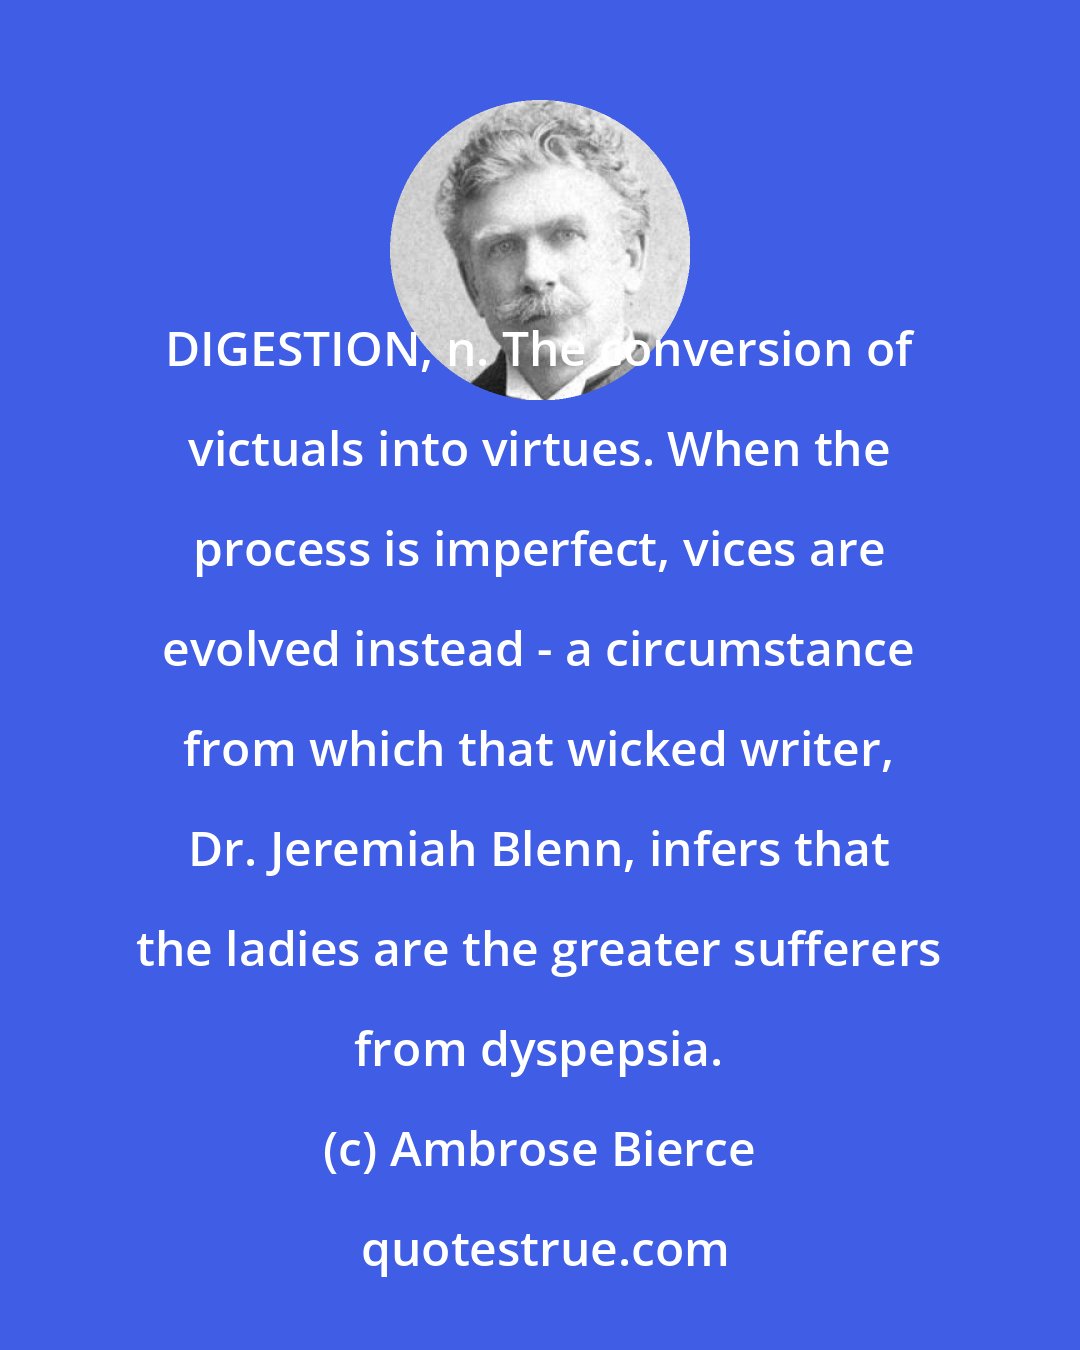 Ambrose Bierce: DIGESTION, n. The conversion of victuals into virtues. When the process is imperfect, vices are evolved instead - a circumstance from which that wicked writer, Dr. Jeremiah Blenn, infers that the ladies are the greater sufferers from dyspepsia.